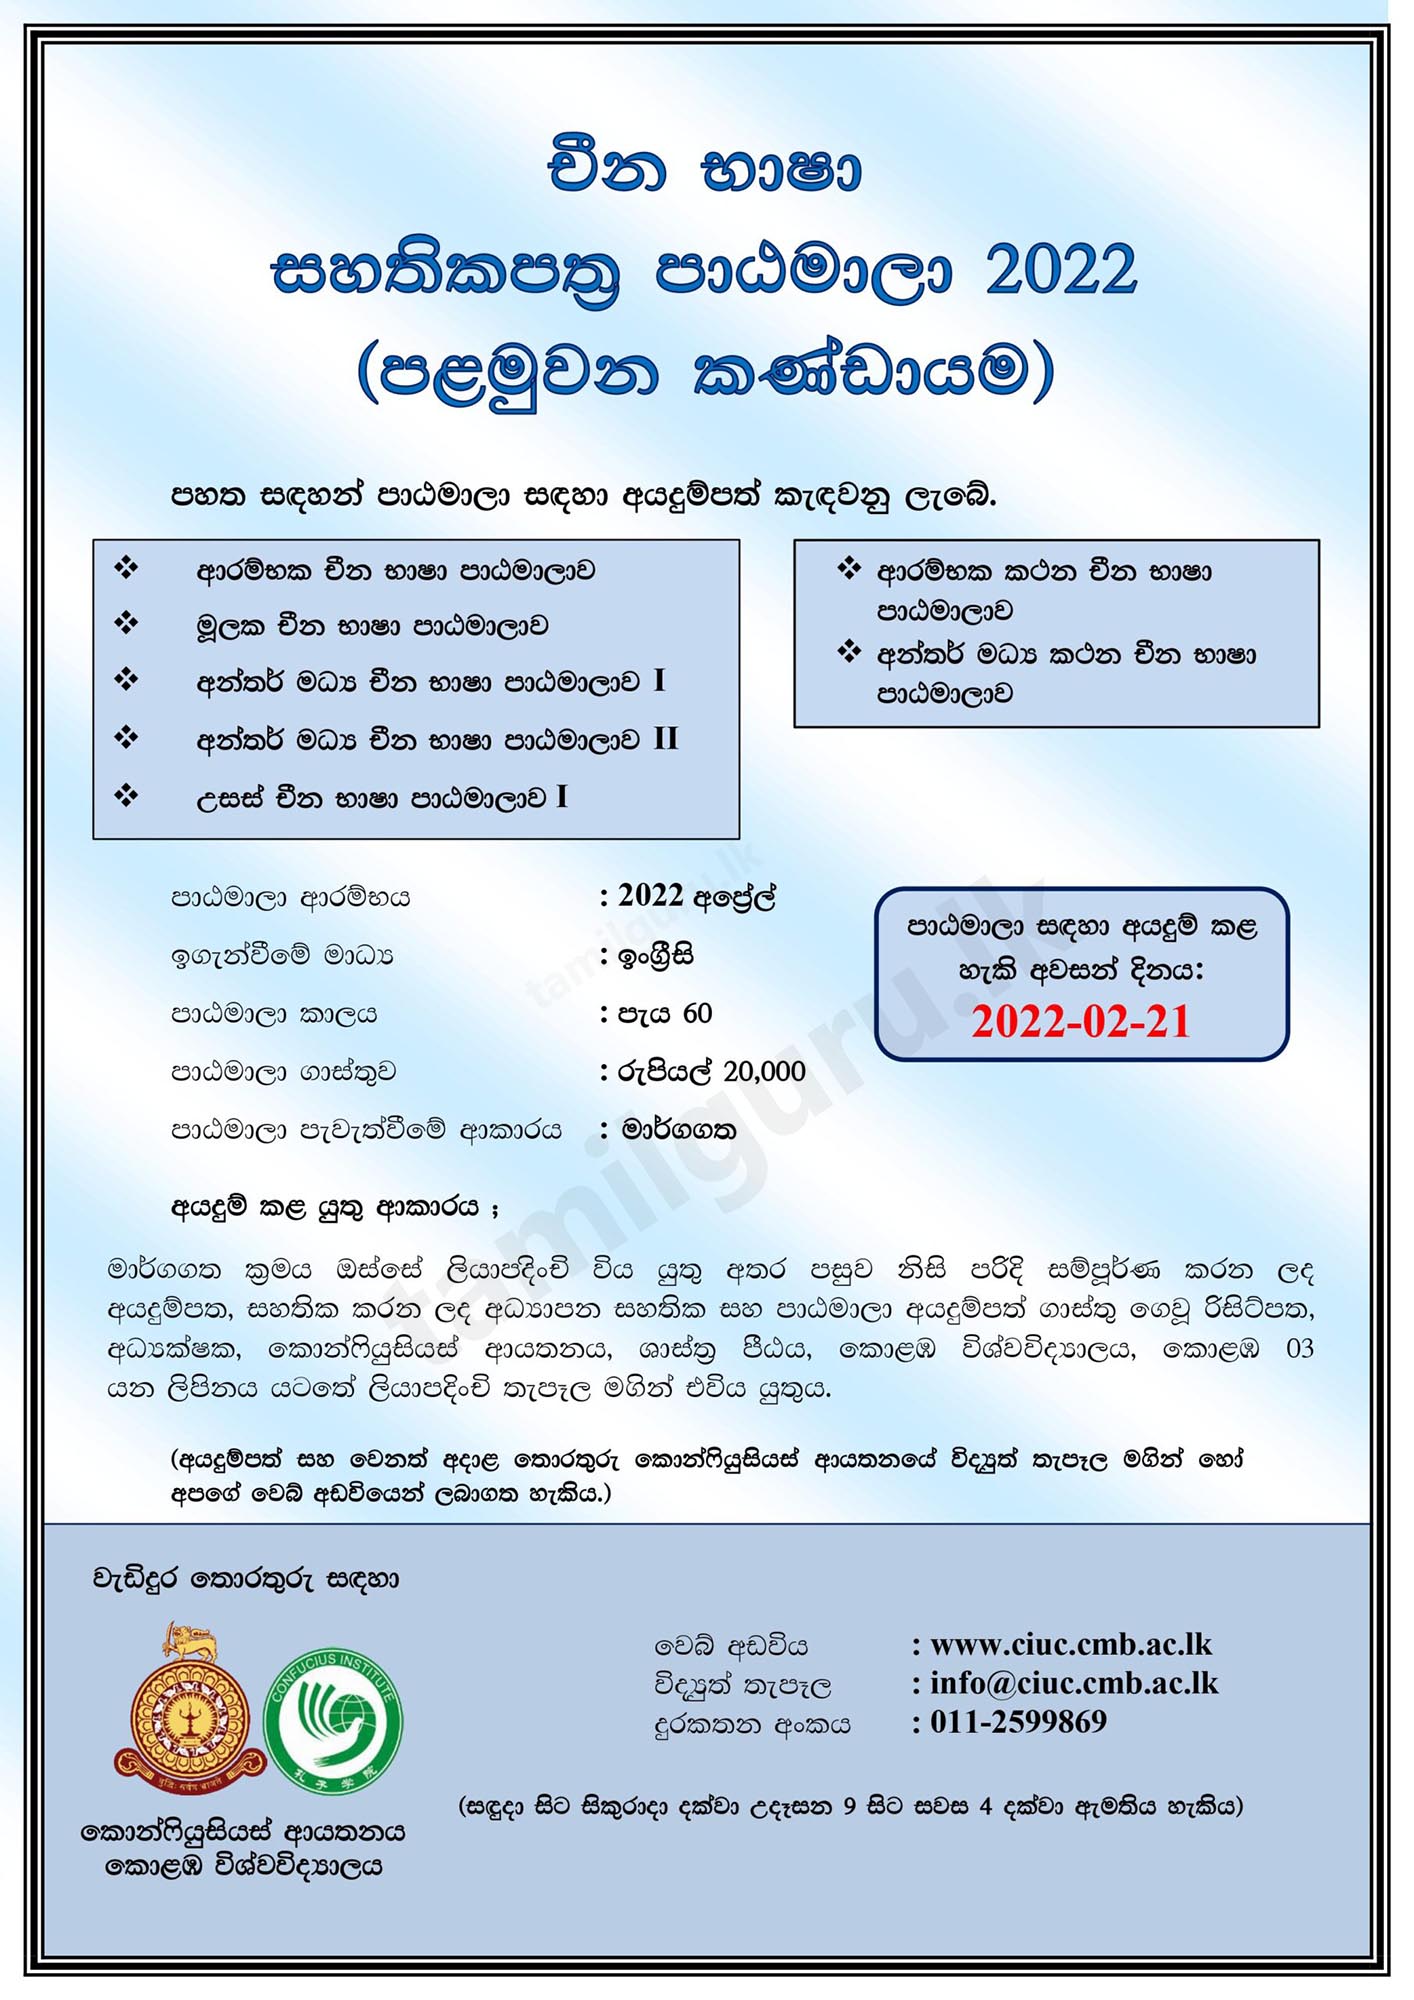 Calling Applications for Online Chinese Language Certificate Courses 2022 (1st Batch) - University of Colombo (Confucius Institute) - Notice in Sinhala